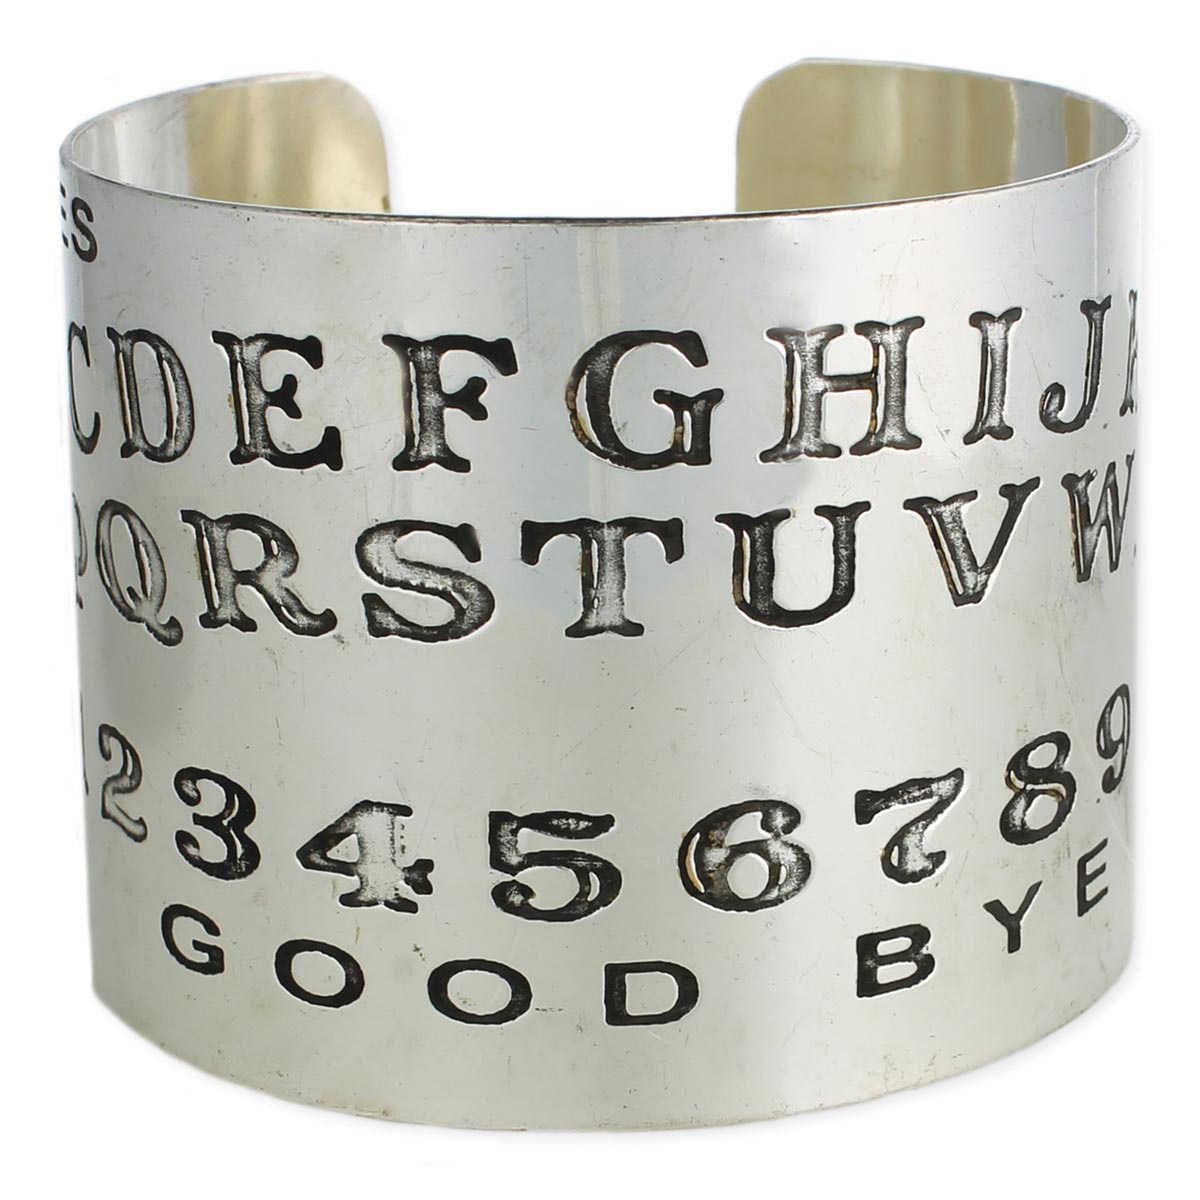 Antiqued silver metal with stamped Ouija Board design 2" wide cuff bracelet